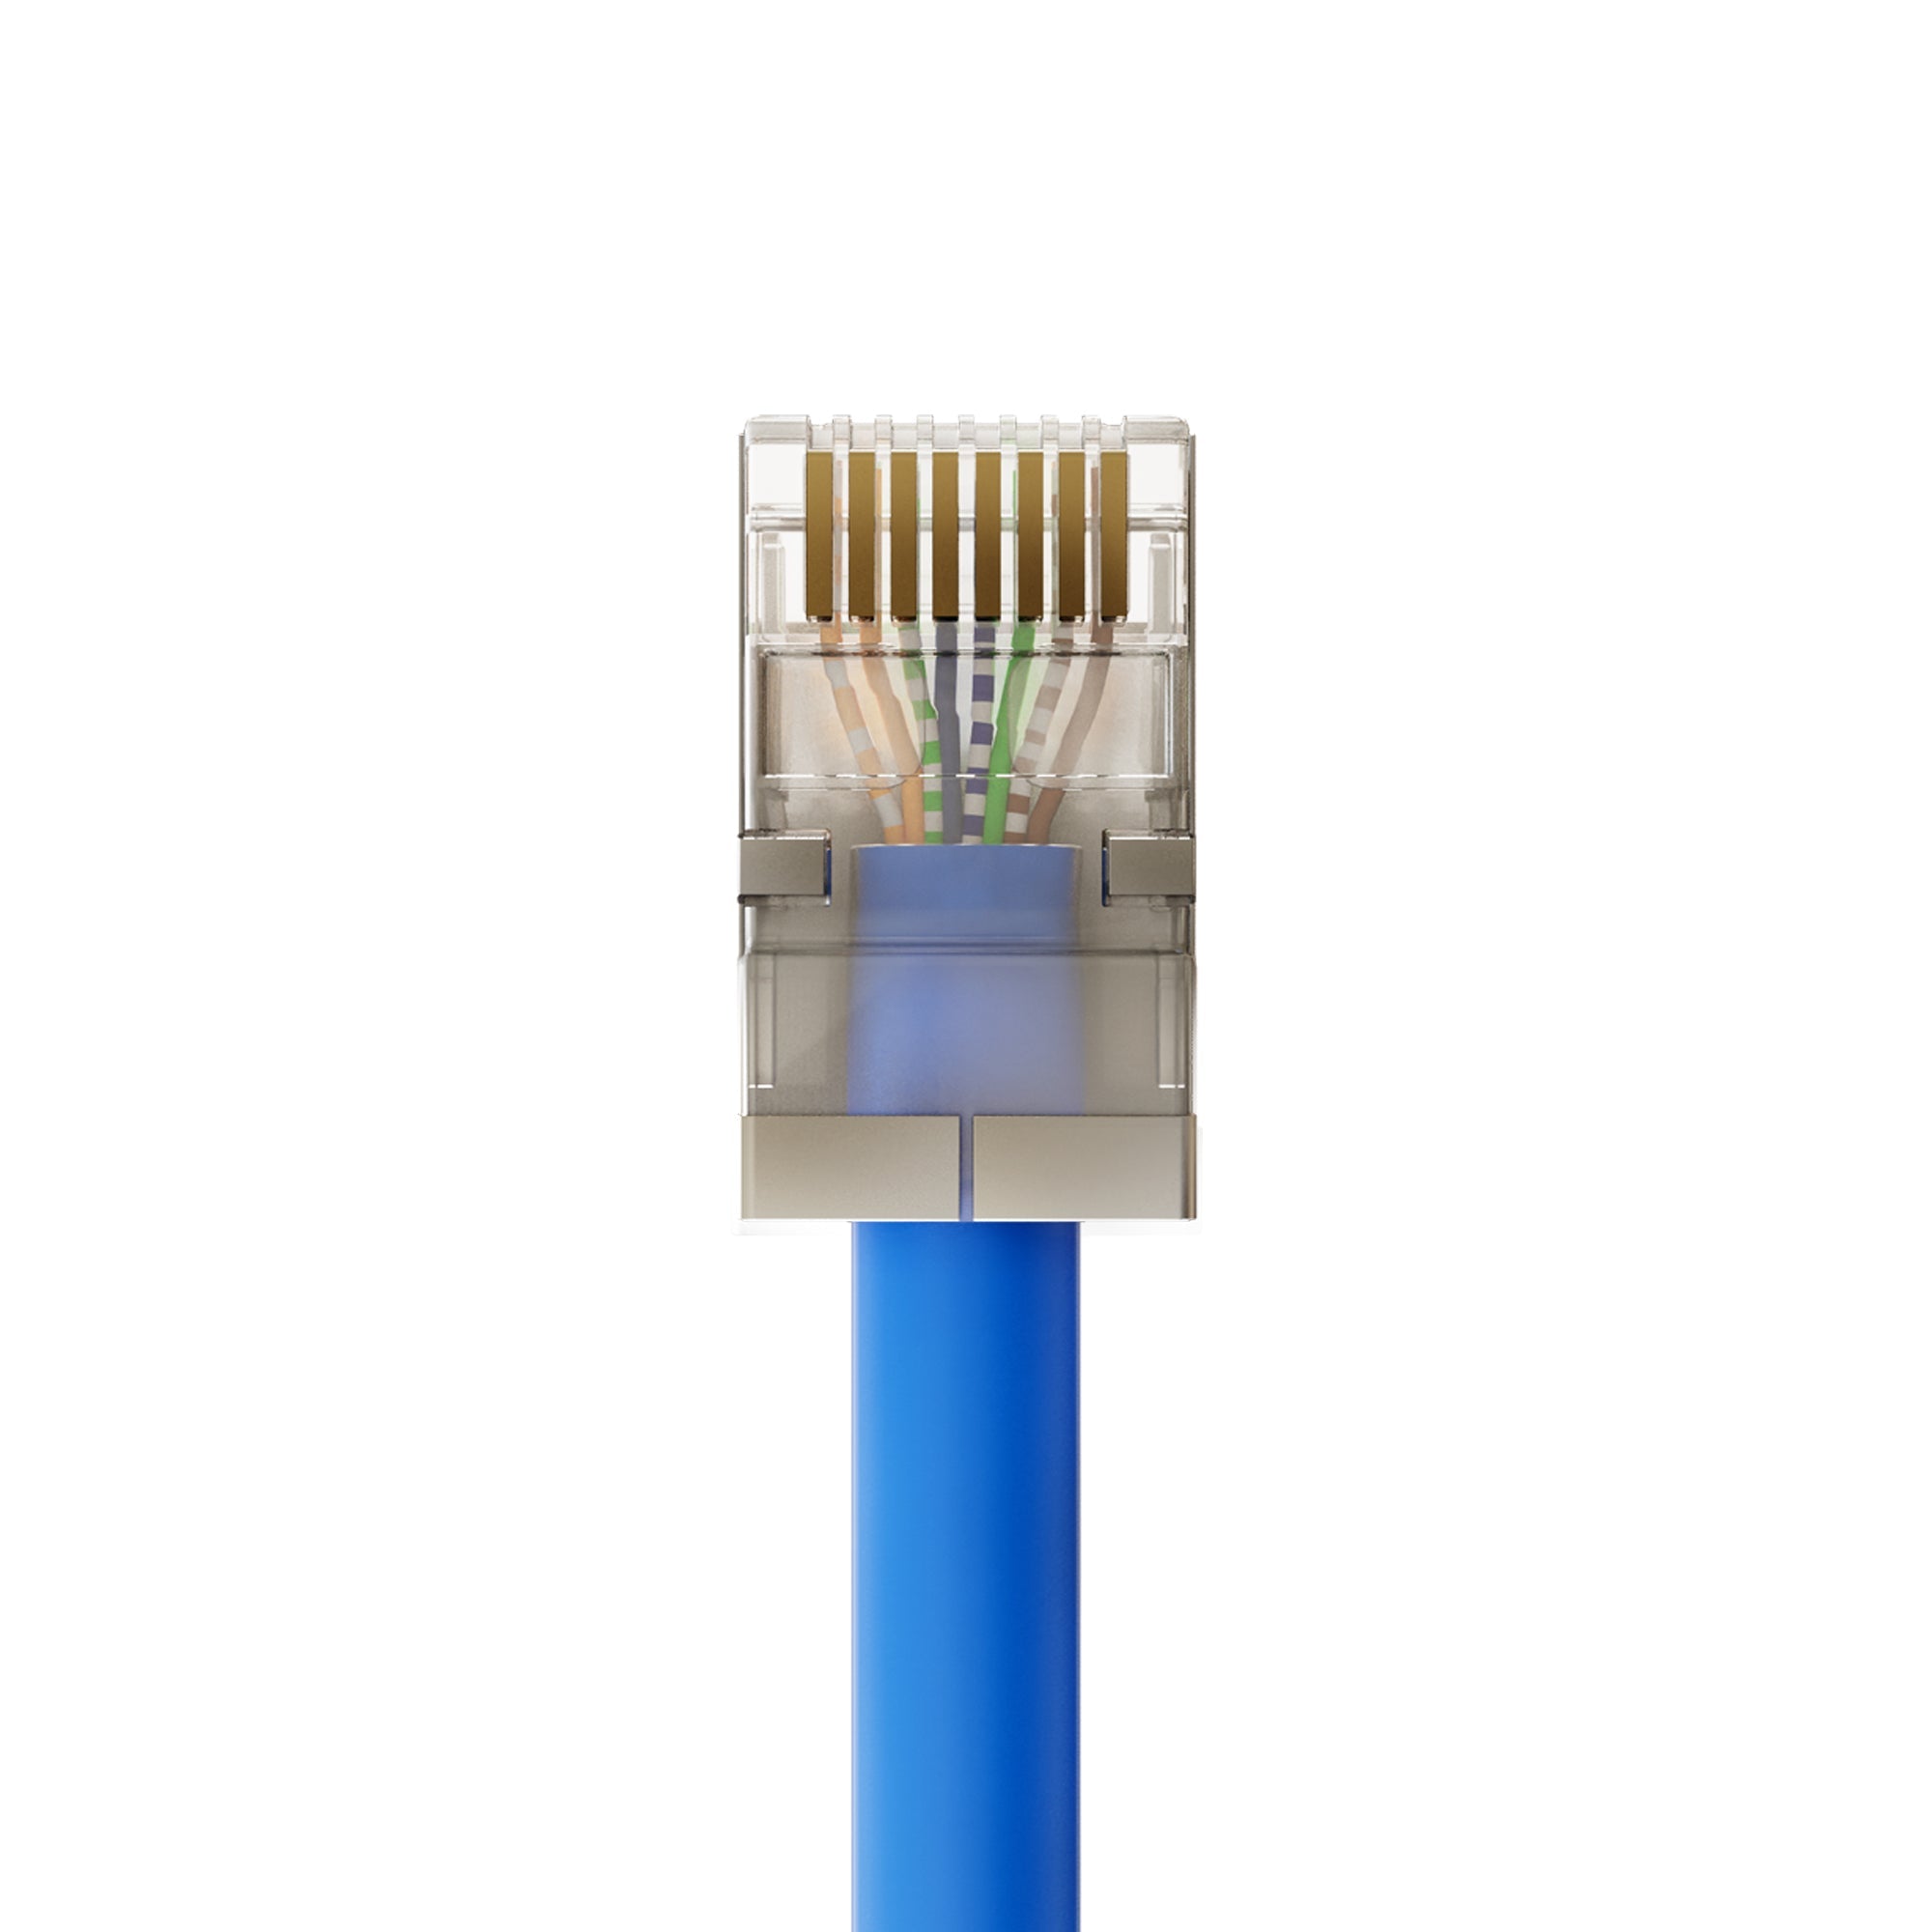 RJ45 8 Position 8 Contact Plug For Cat6a Cable Pack of 50